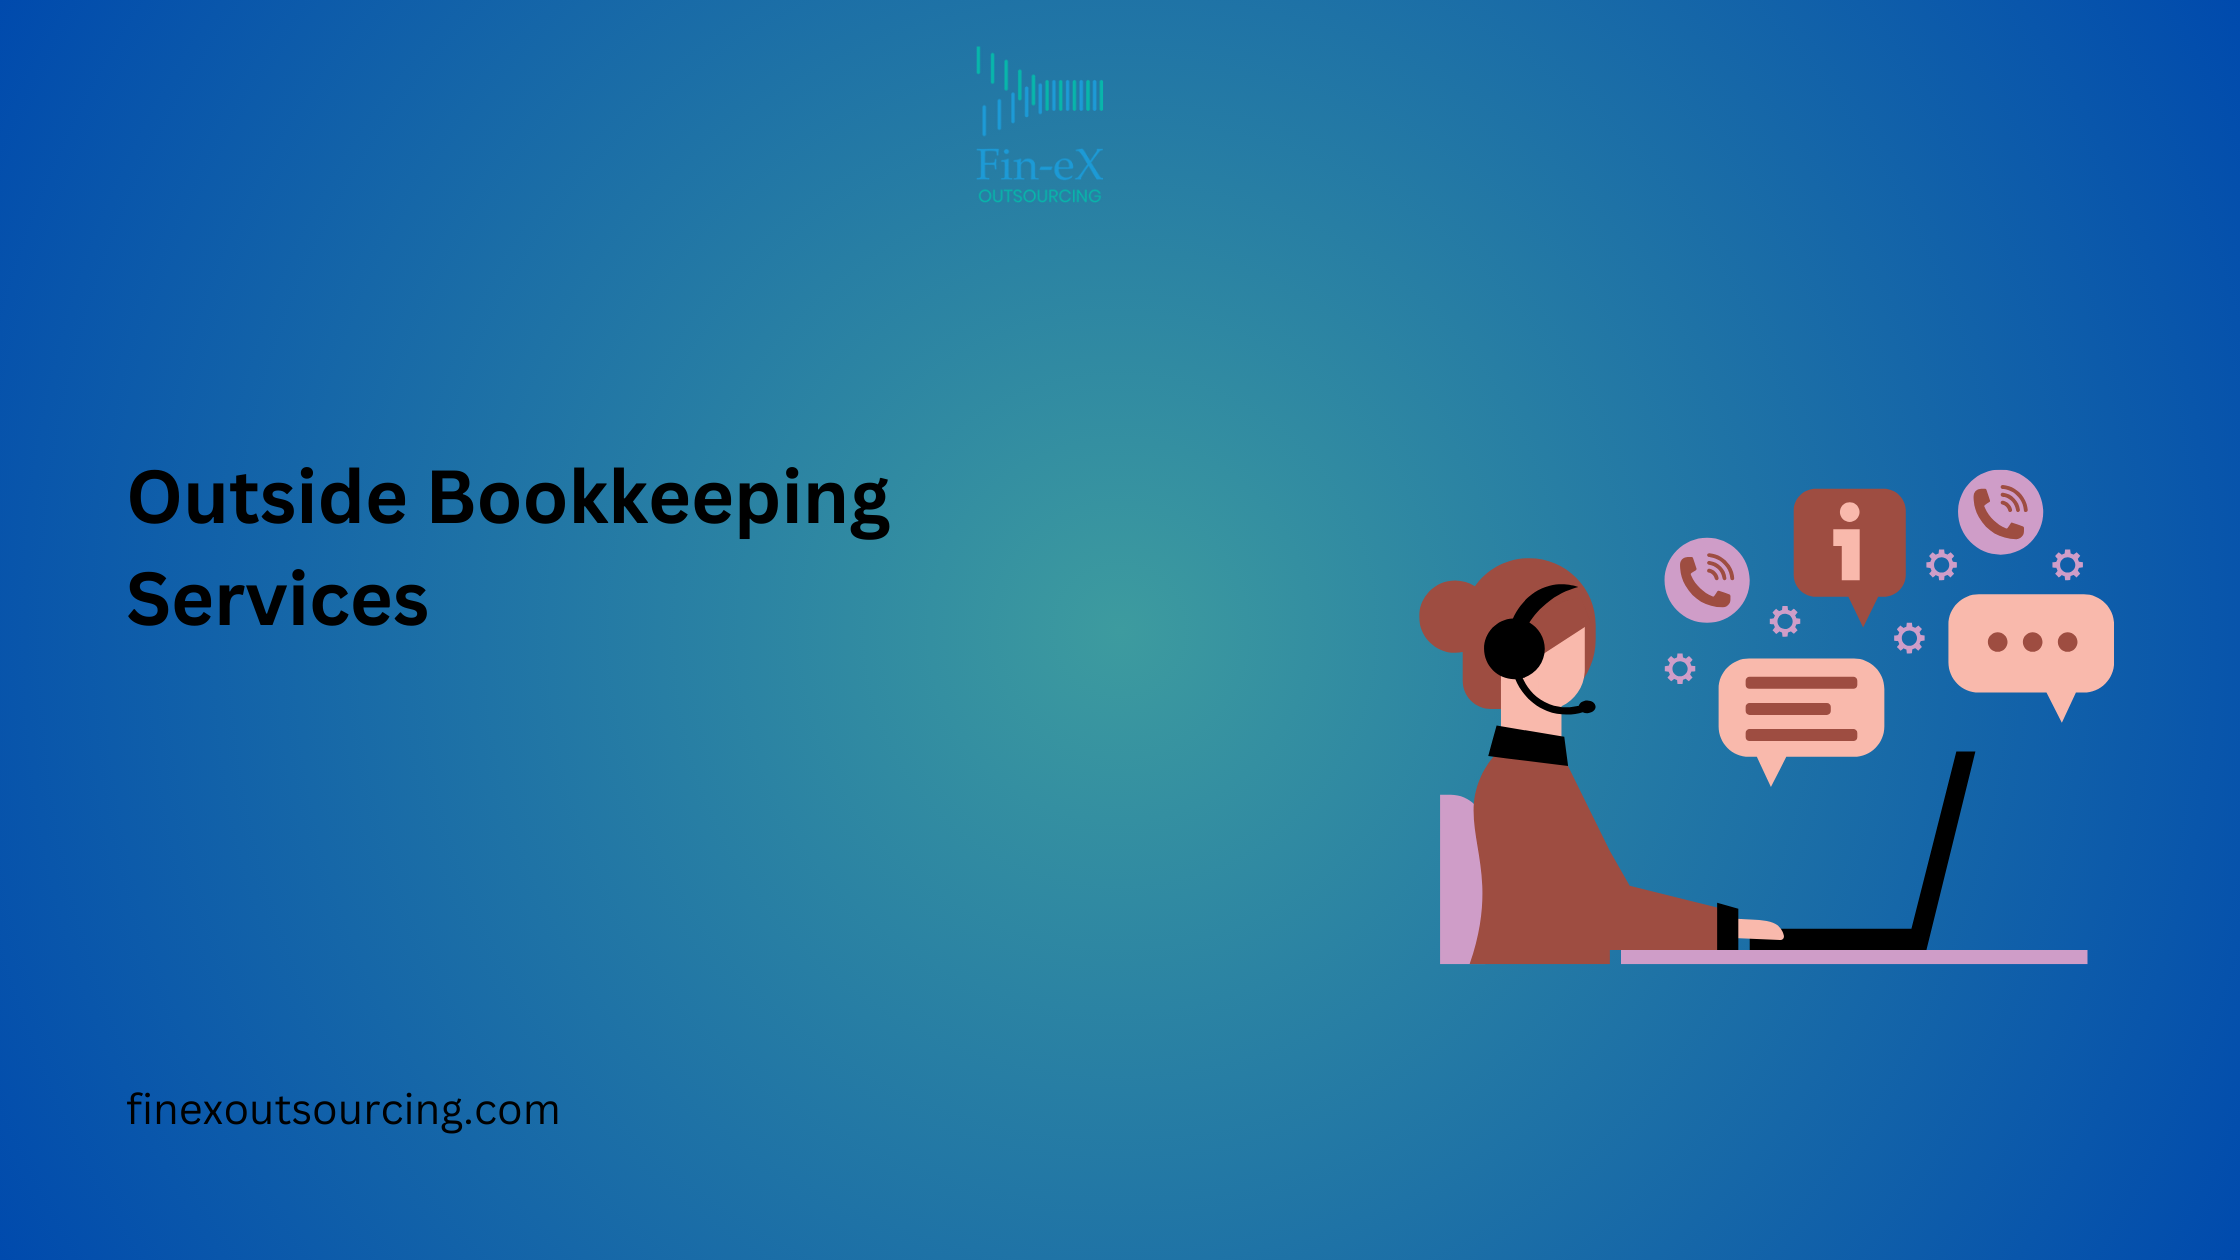 The Top 5 Reasons Why You Should Consider Hiring an Outside Bookkeeping Service